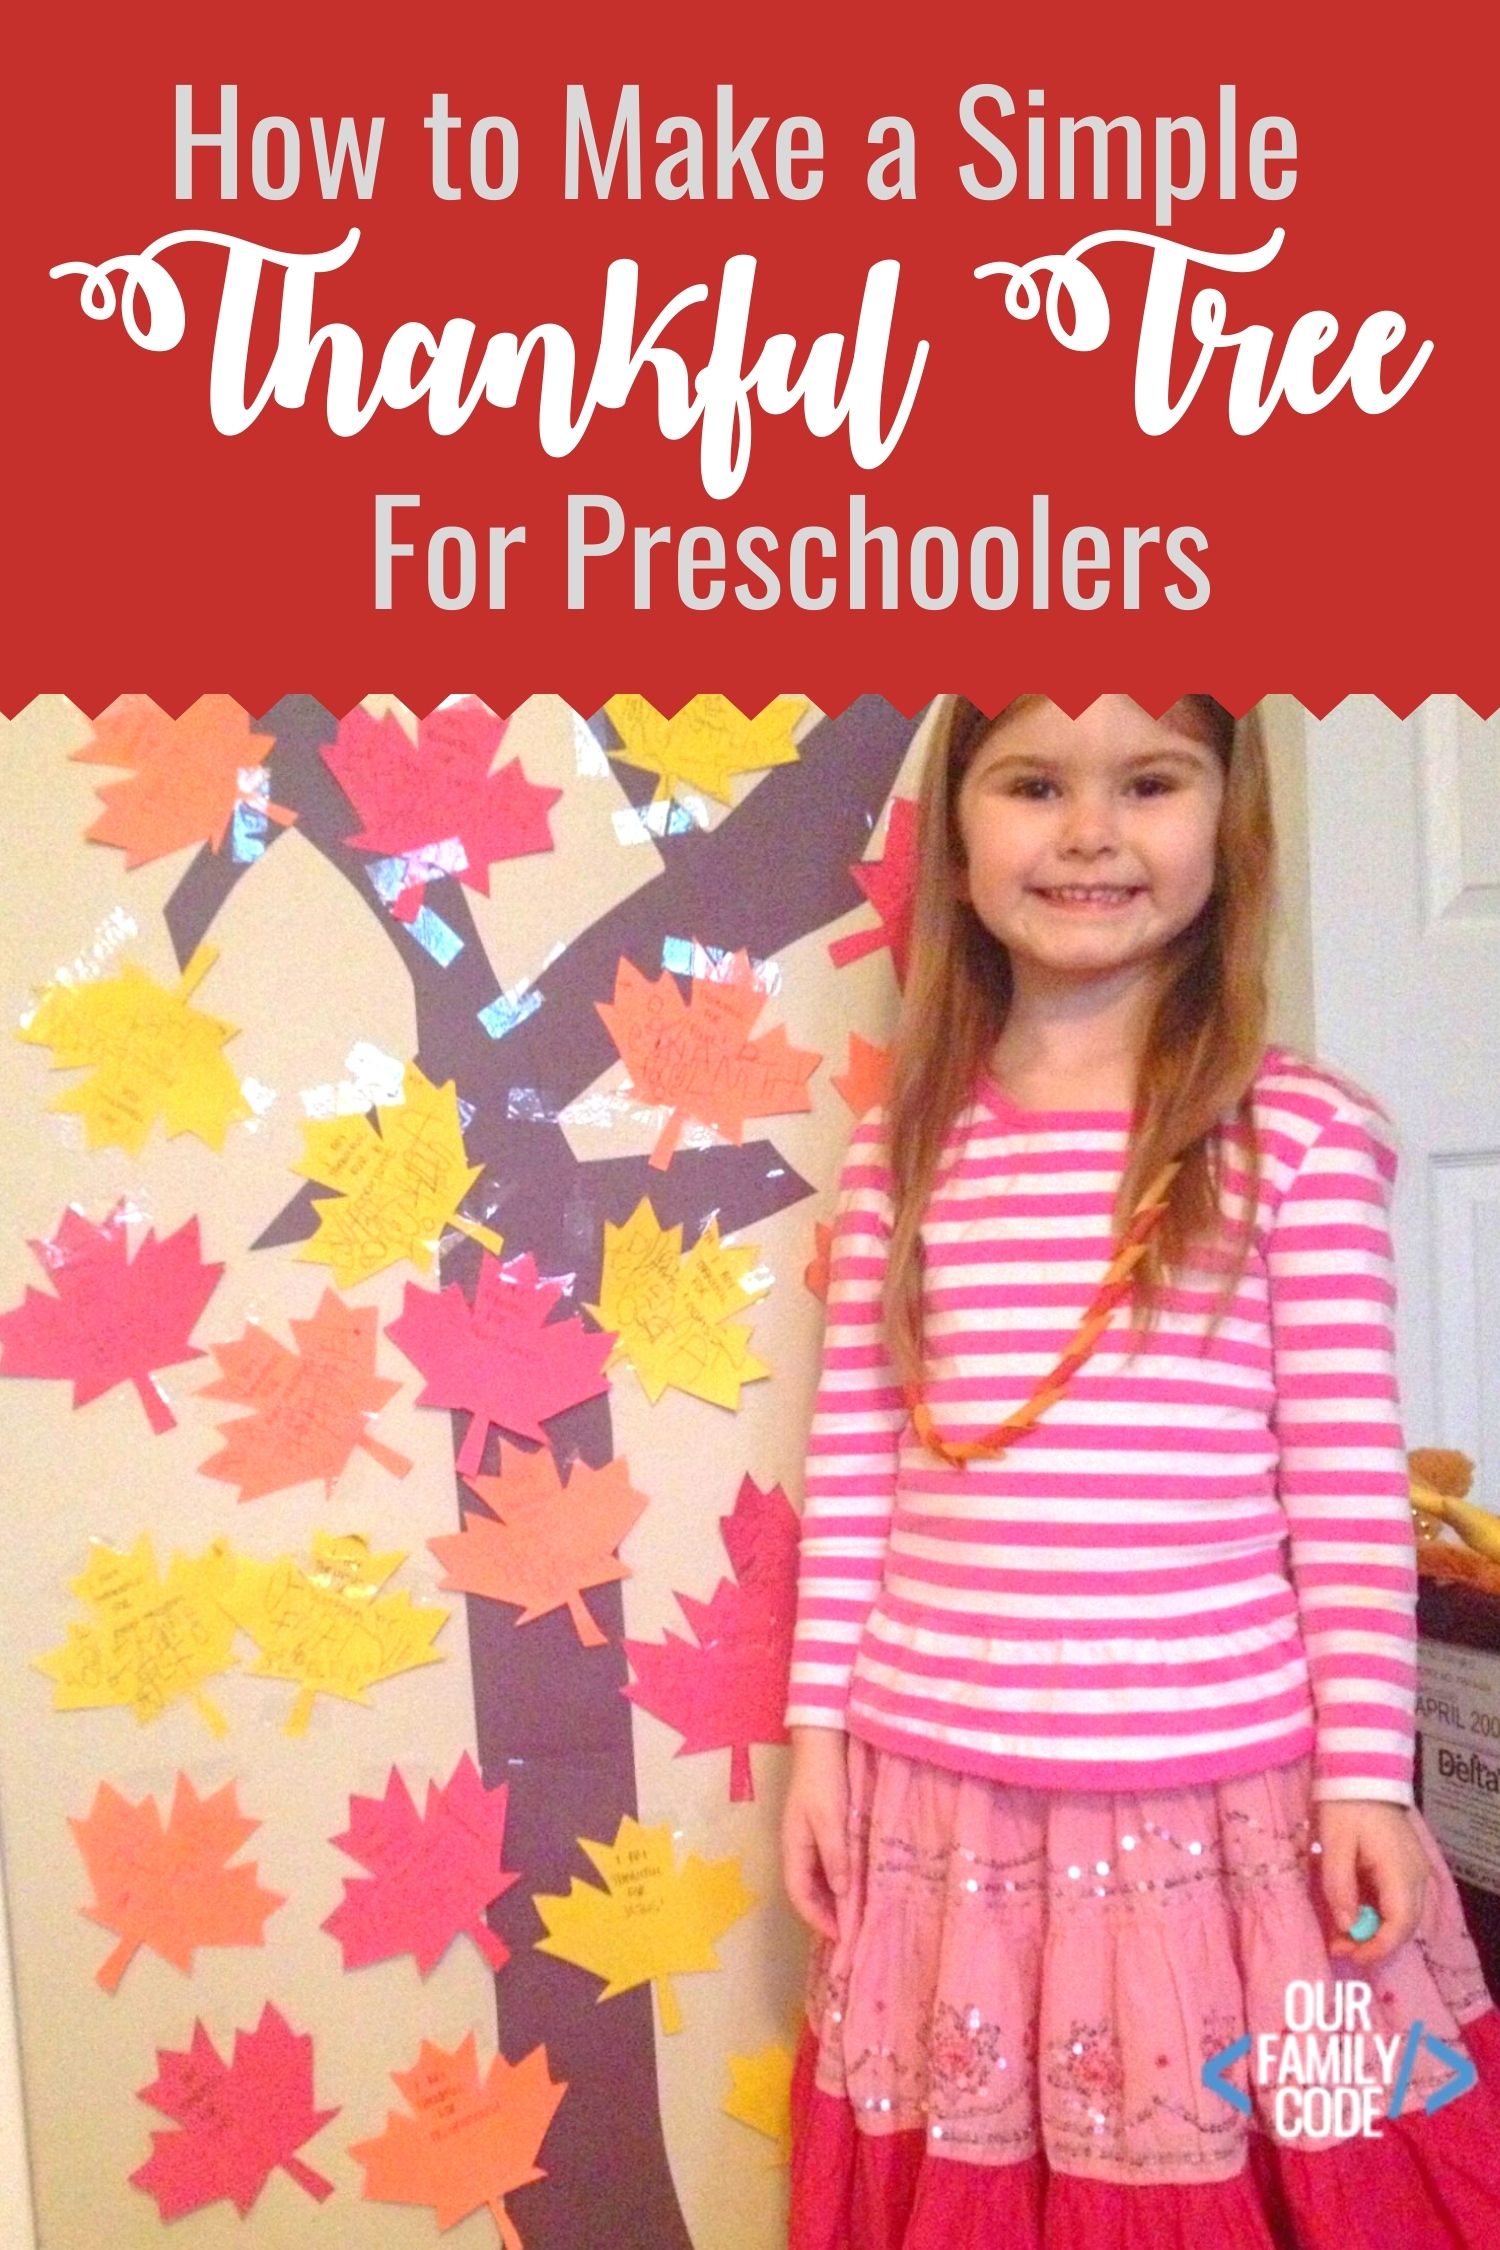 A picture of a preschooler standing in front of thankful tree.